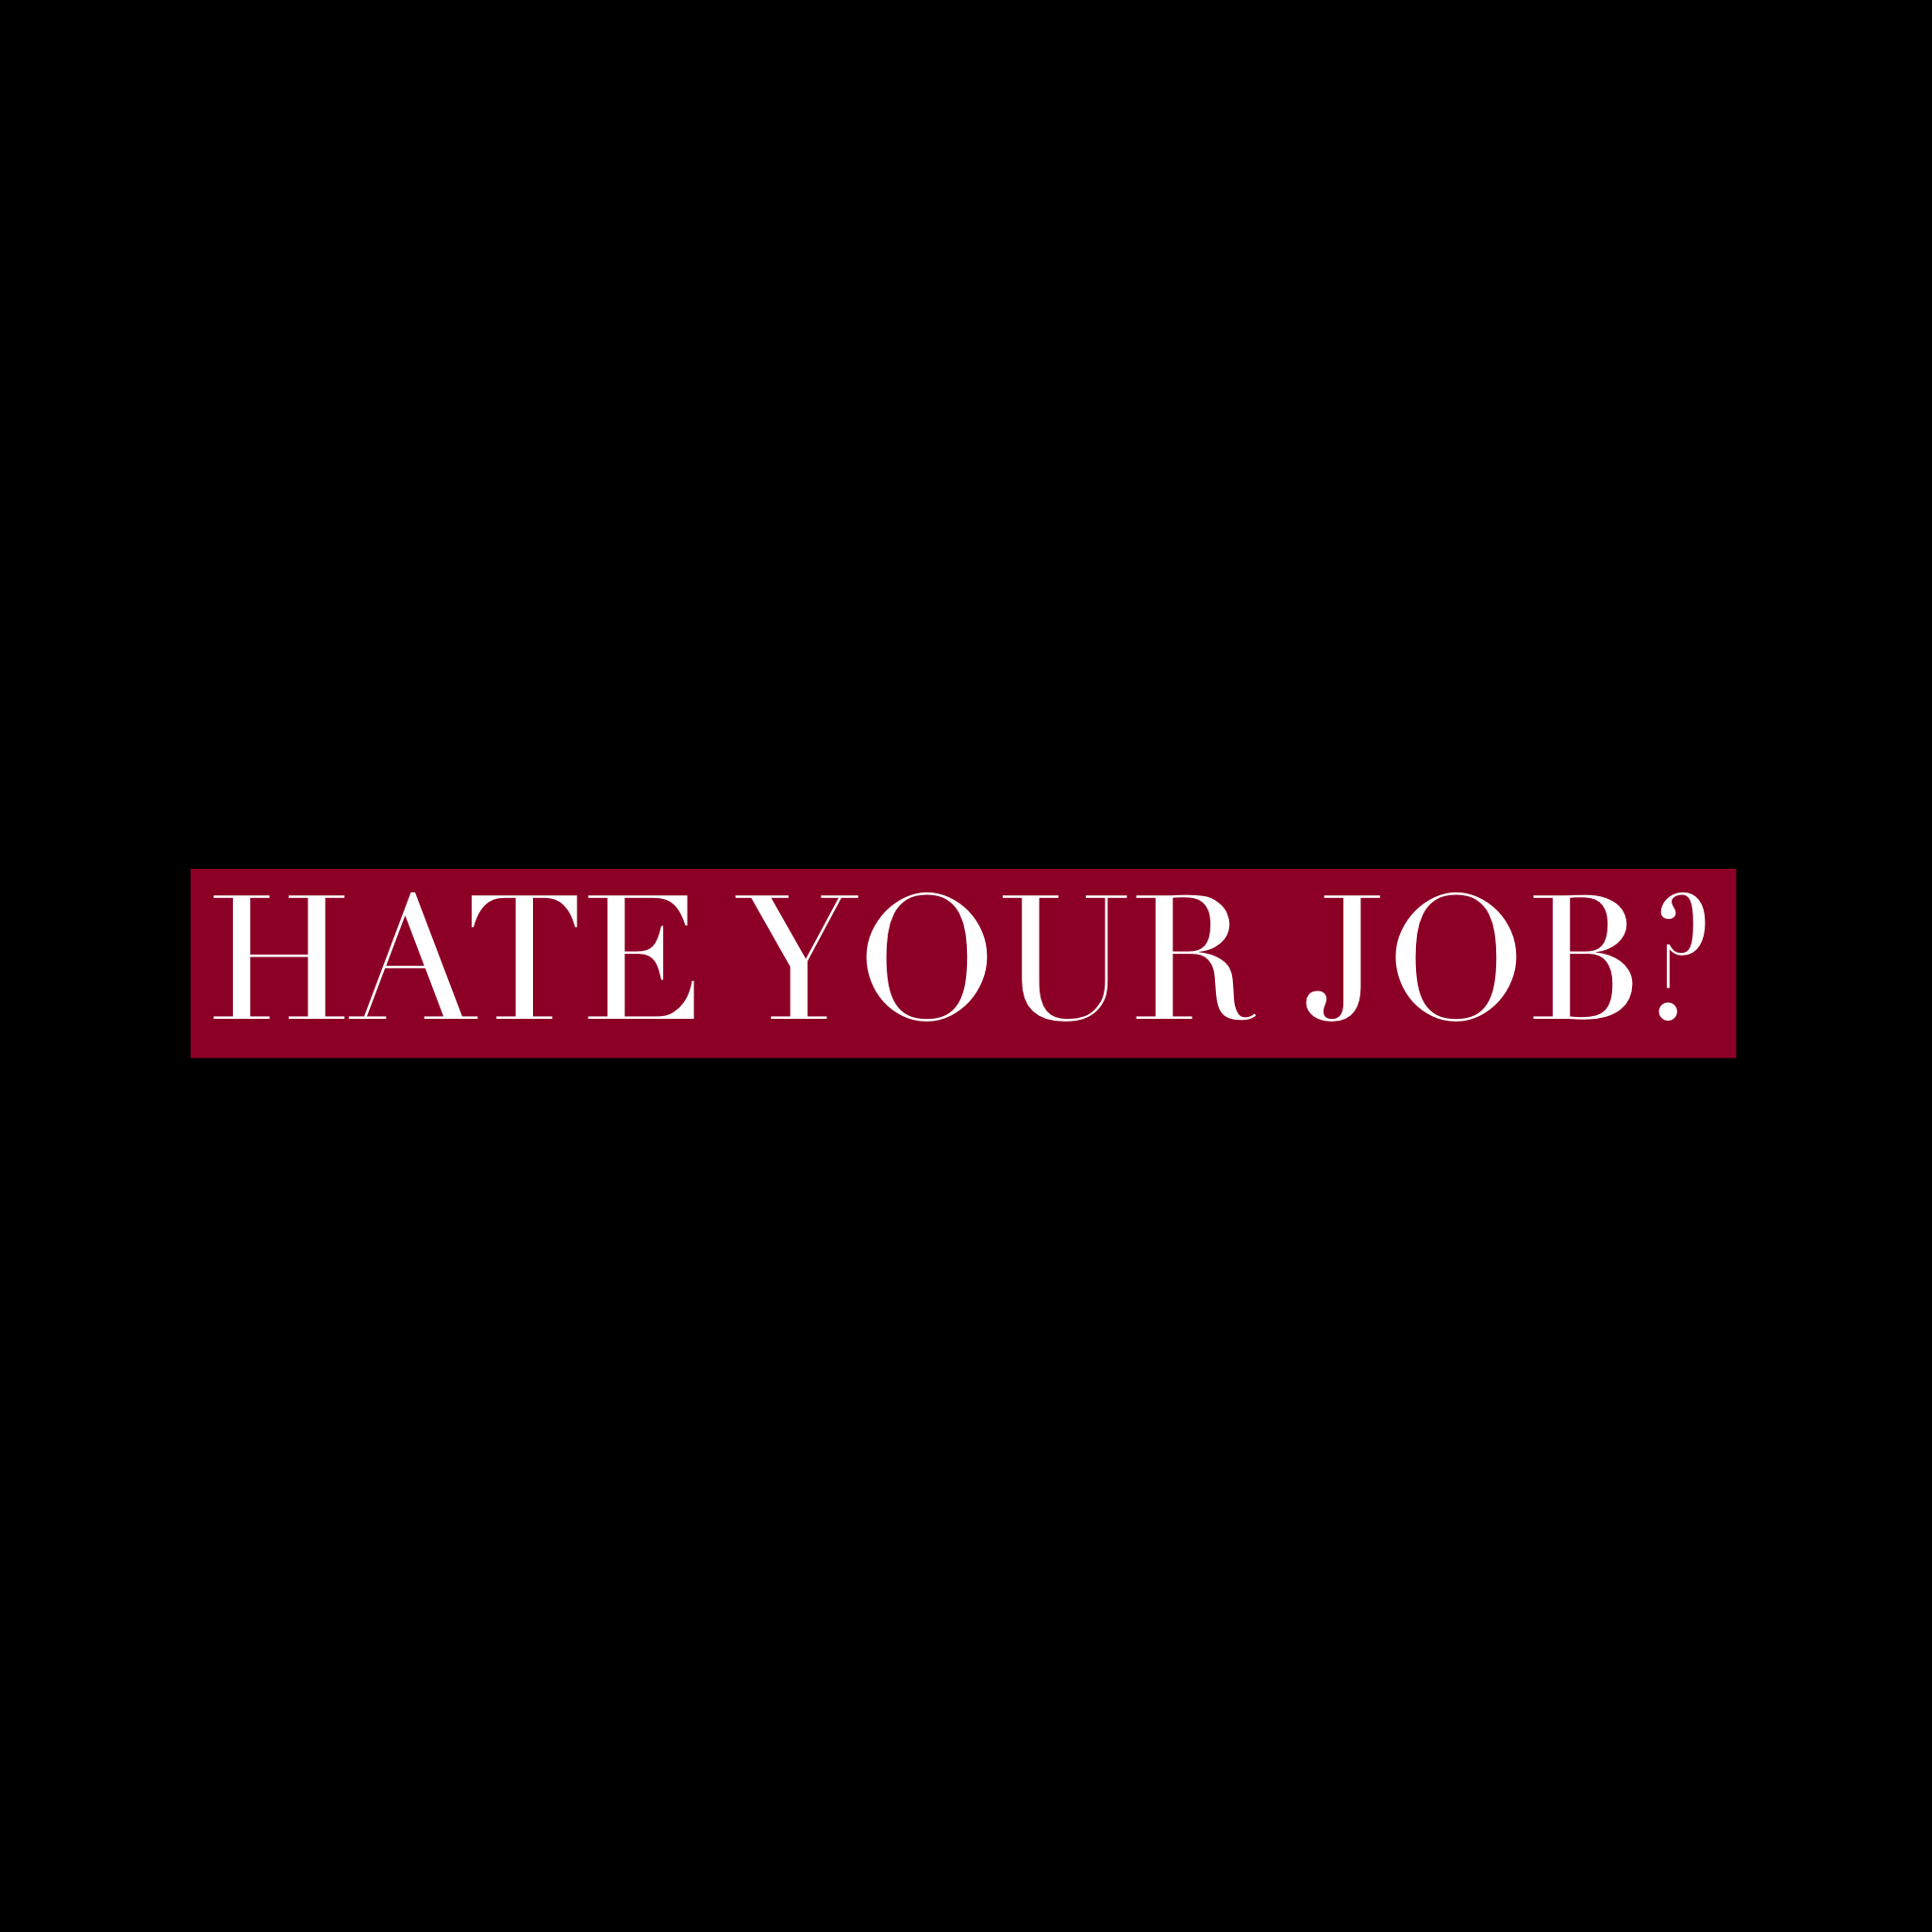 Really really hate your job?